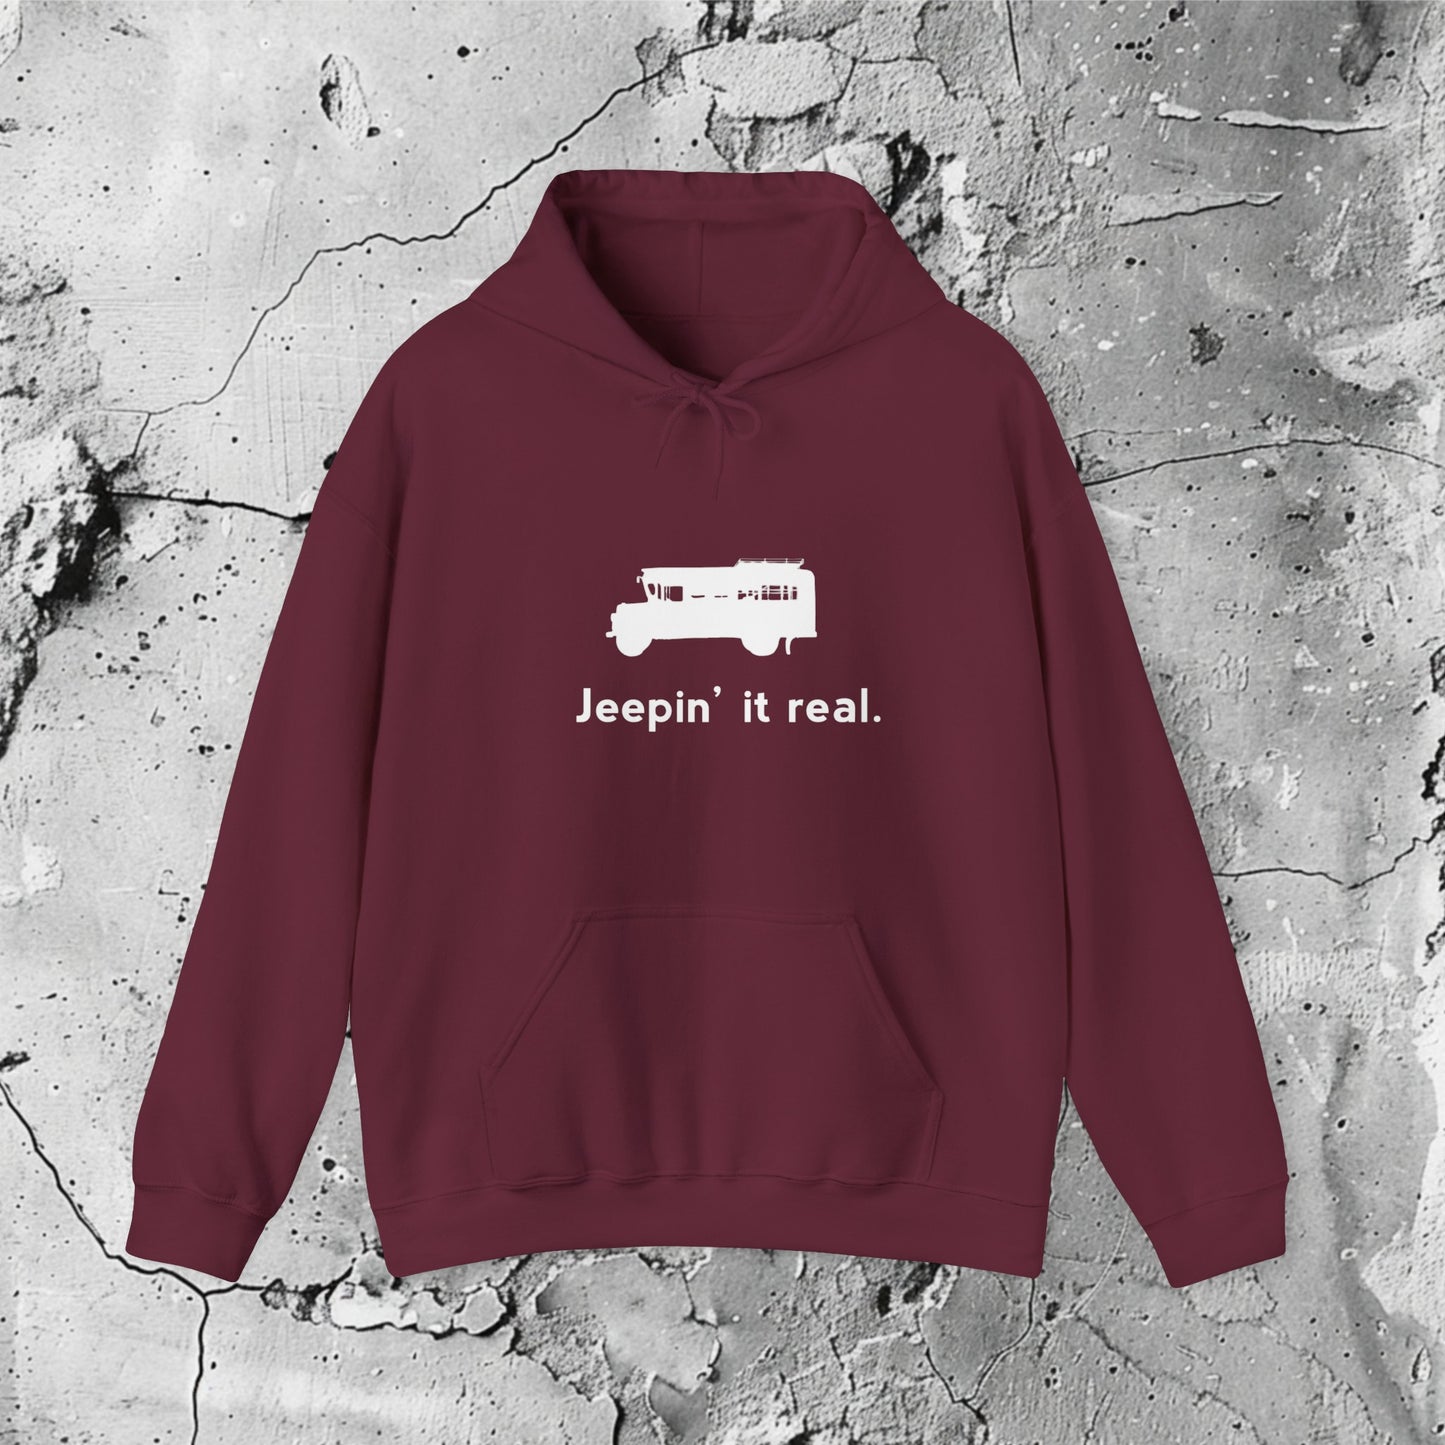 Jeepin' It Real White Graphic Hooded Sweatshirt